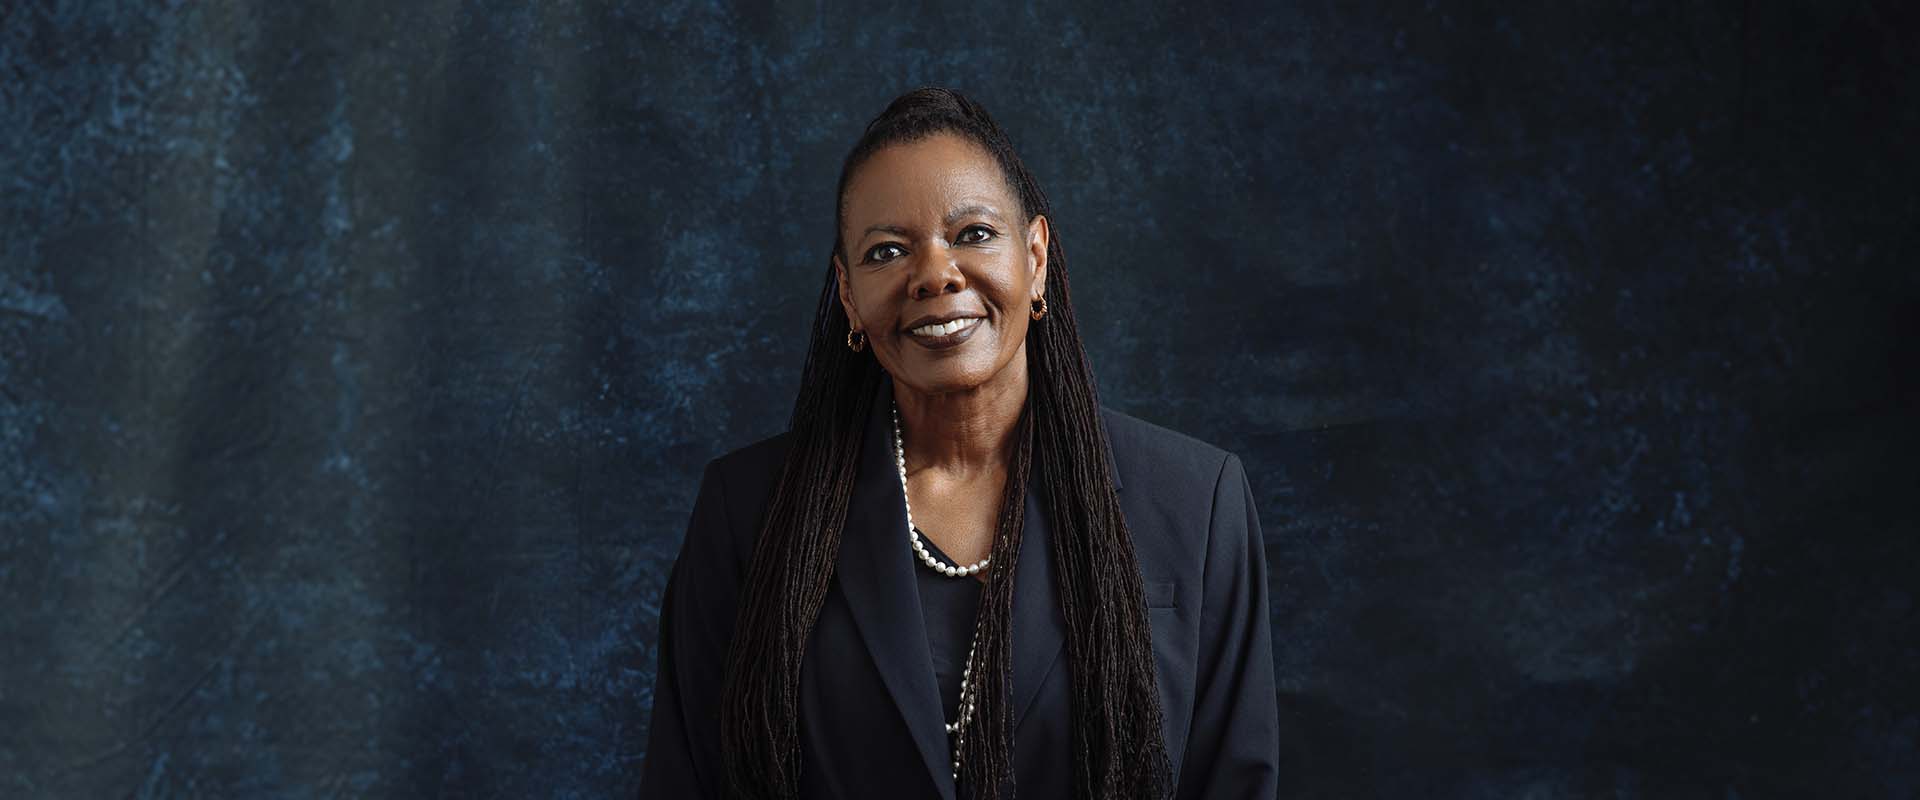 Carolyn Tubbs, Ph.D., Vice Provost for Academic Affairs poses for a photo